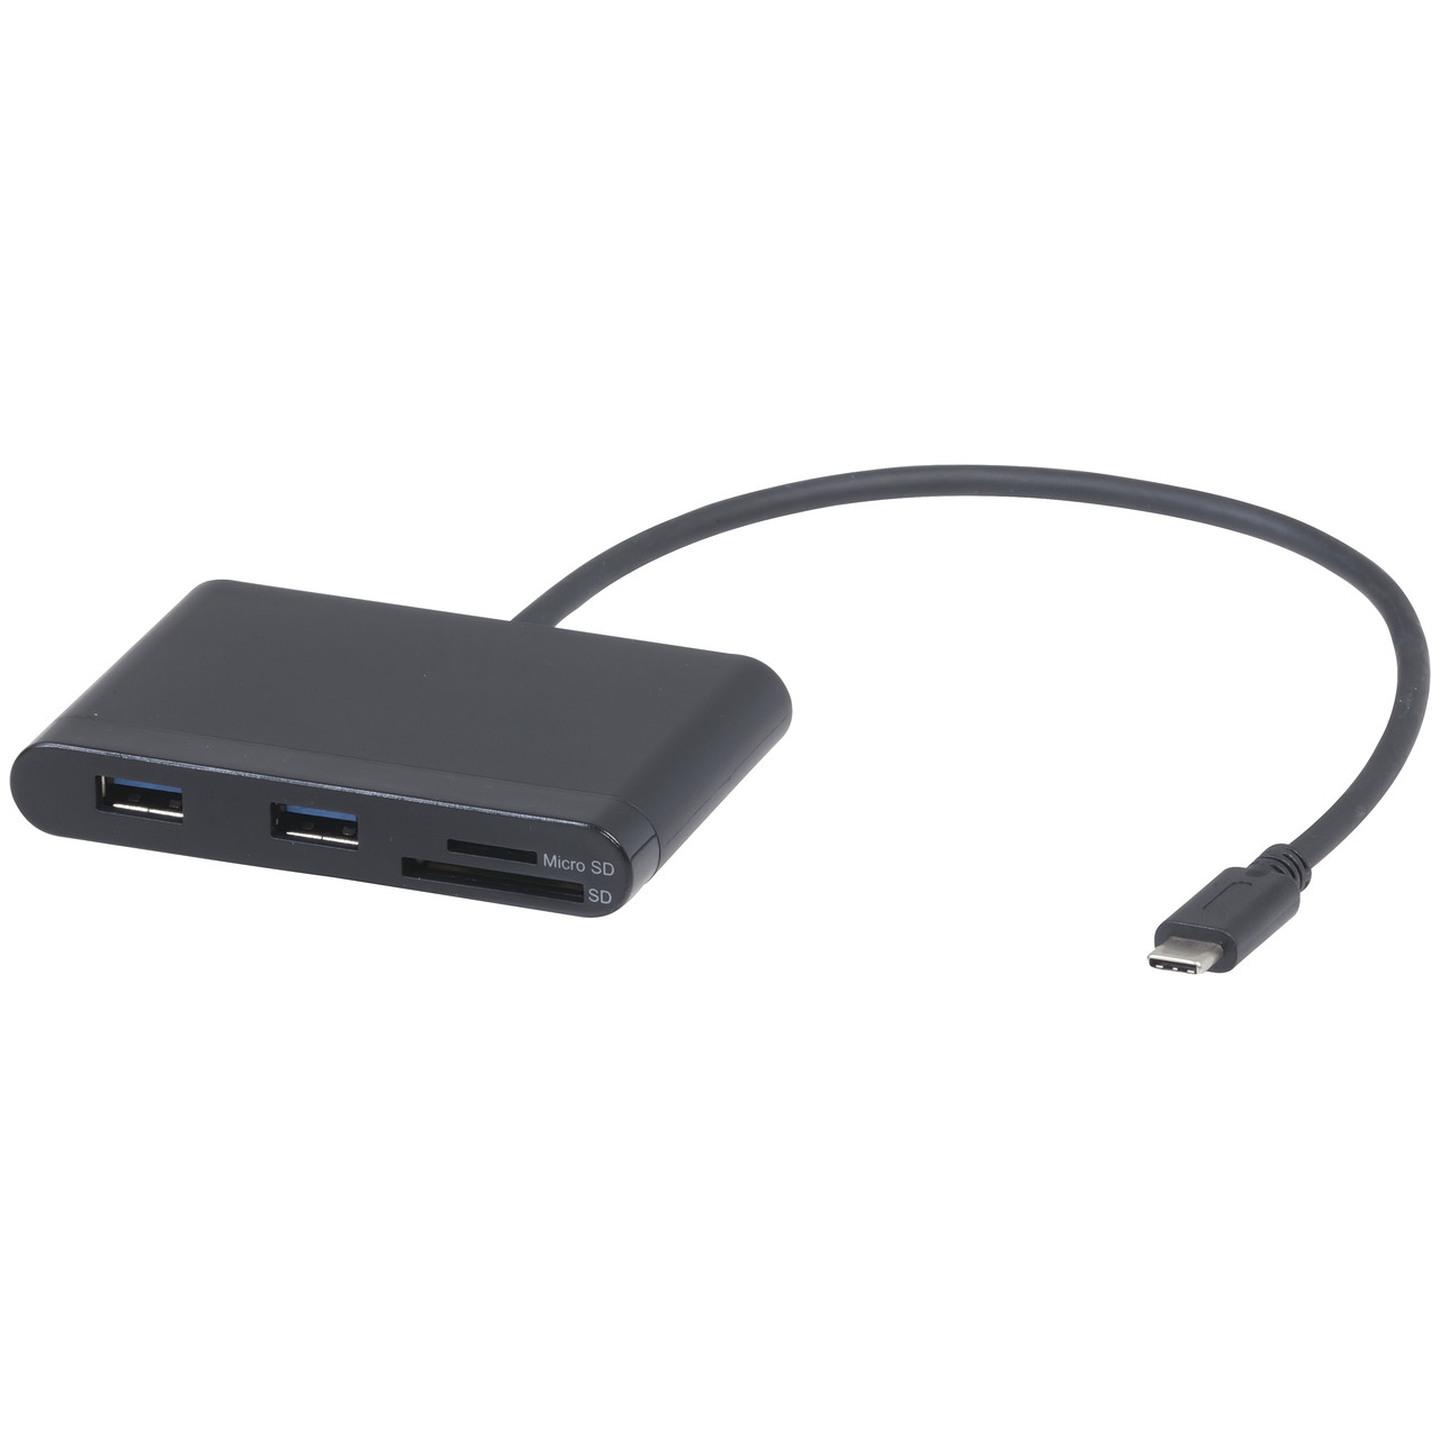 USB 3.0 Type-C Hub and Card Reader with Power Delivery